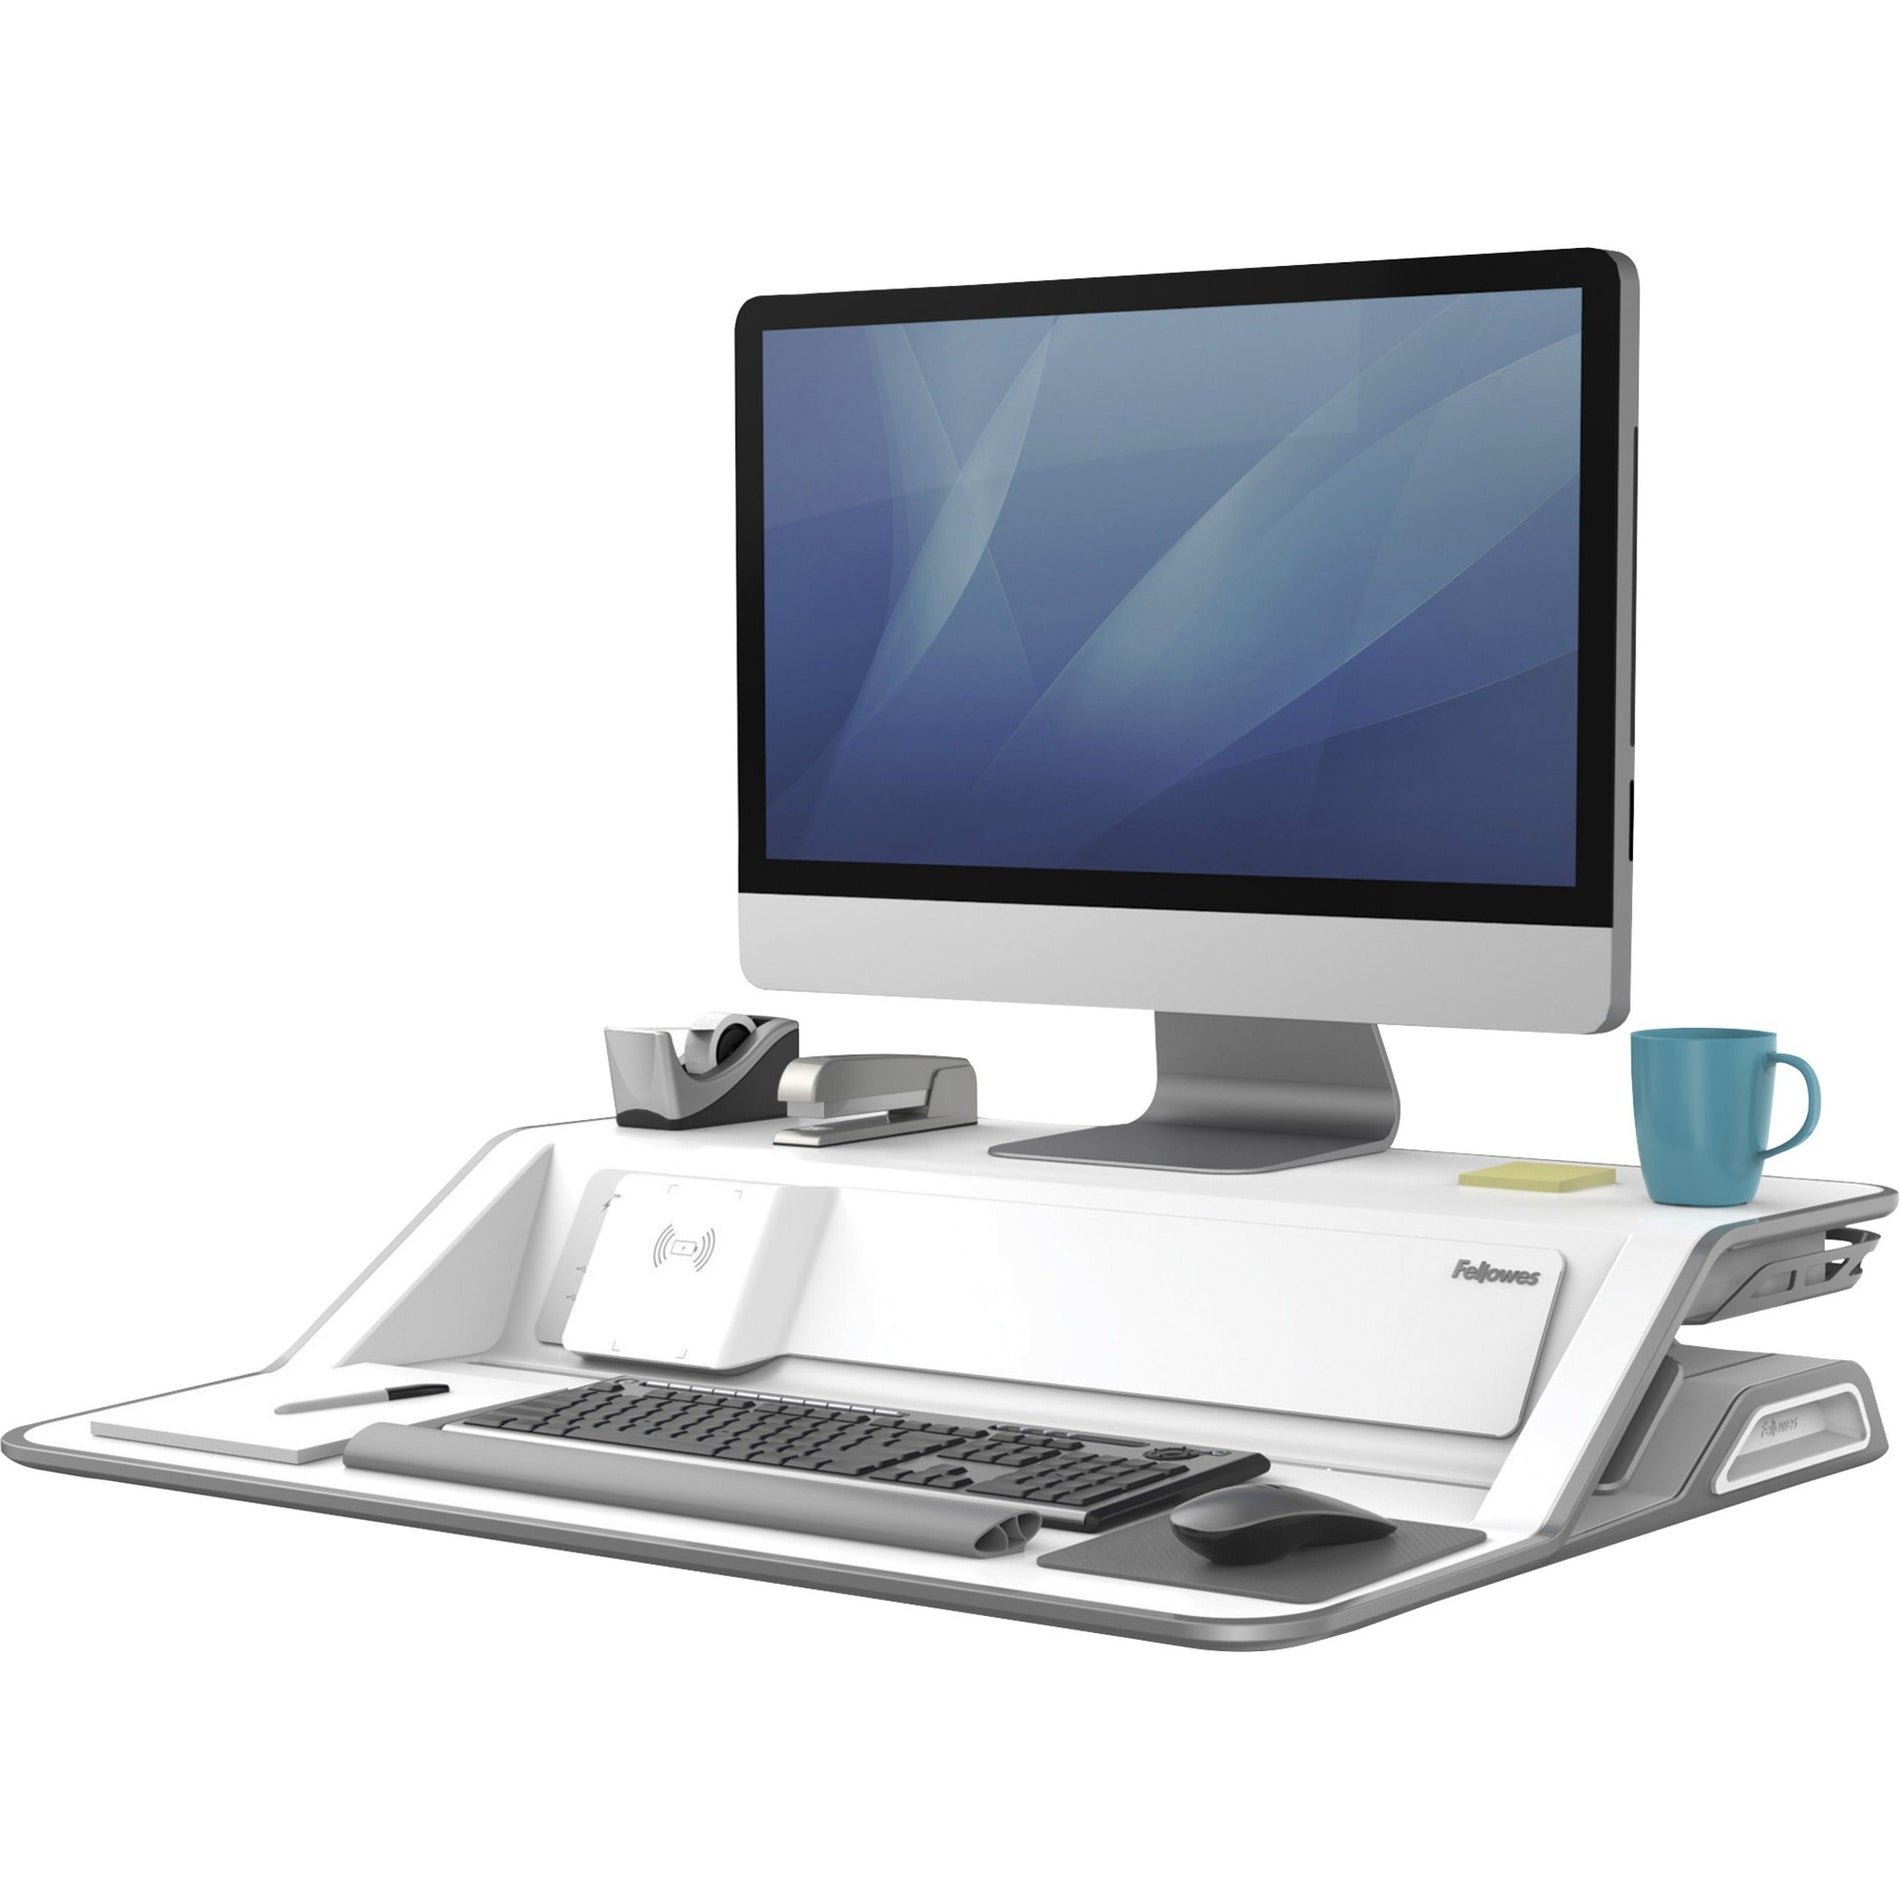 Fellowes 8080201 Lotus DX Sit-Stand Workstation, White - Antimicrobial, Charge Function, Built-in USB Port